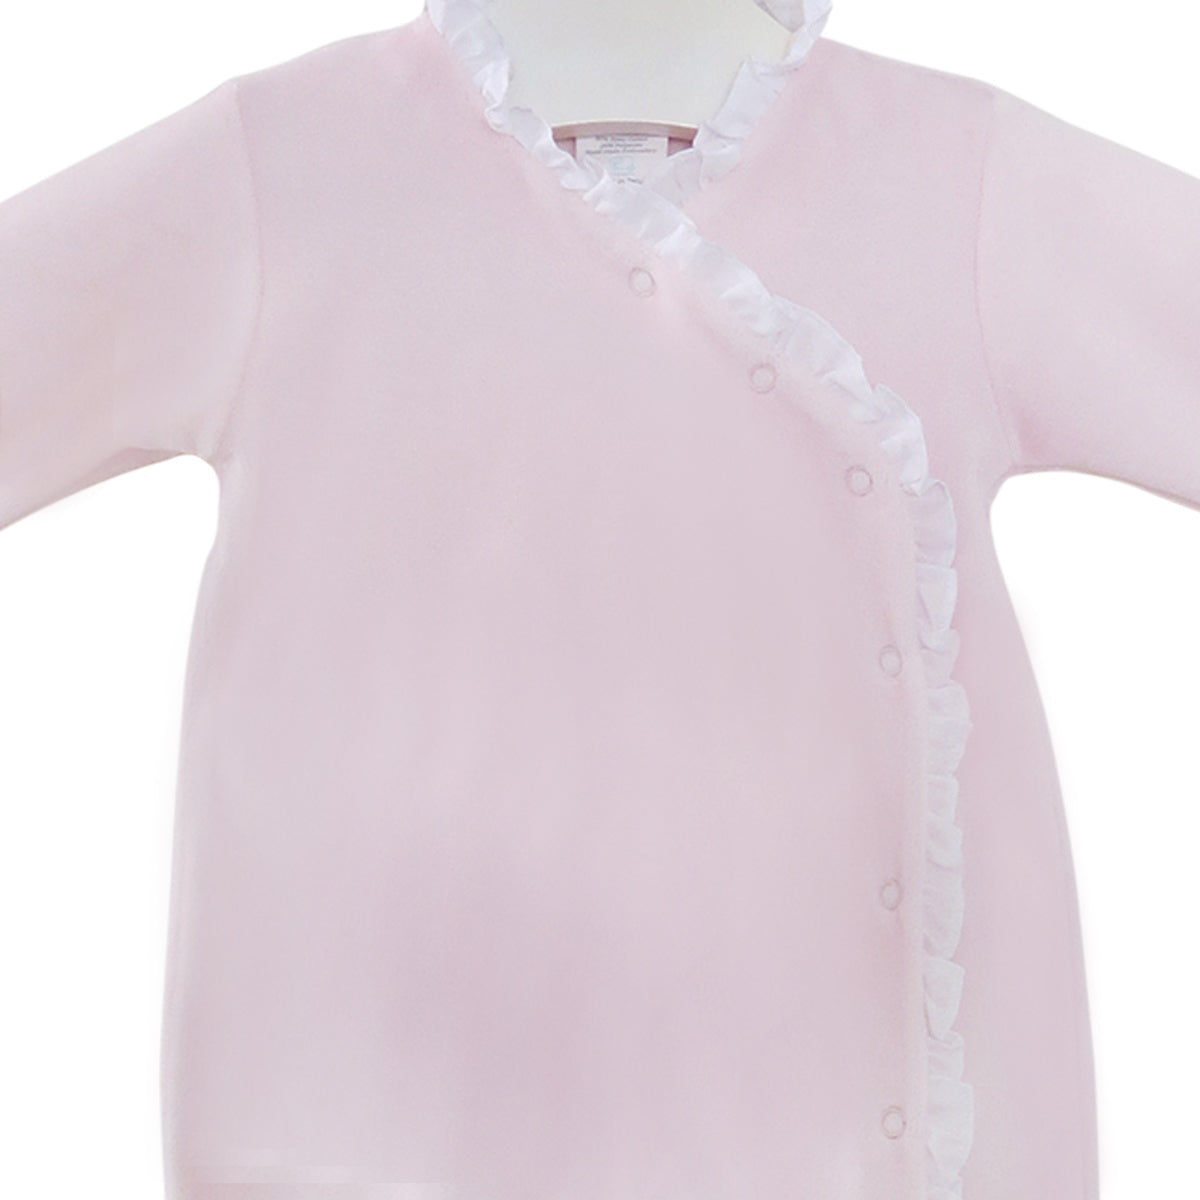 Pink pima cotton velour baby girl footie with white trim - close up